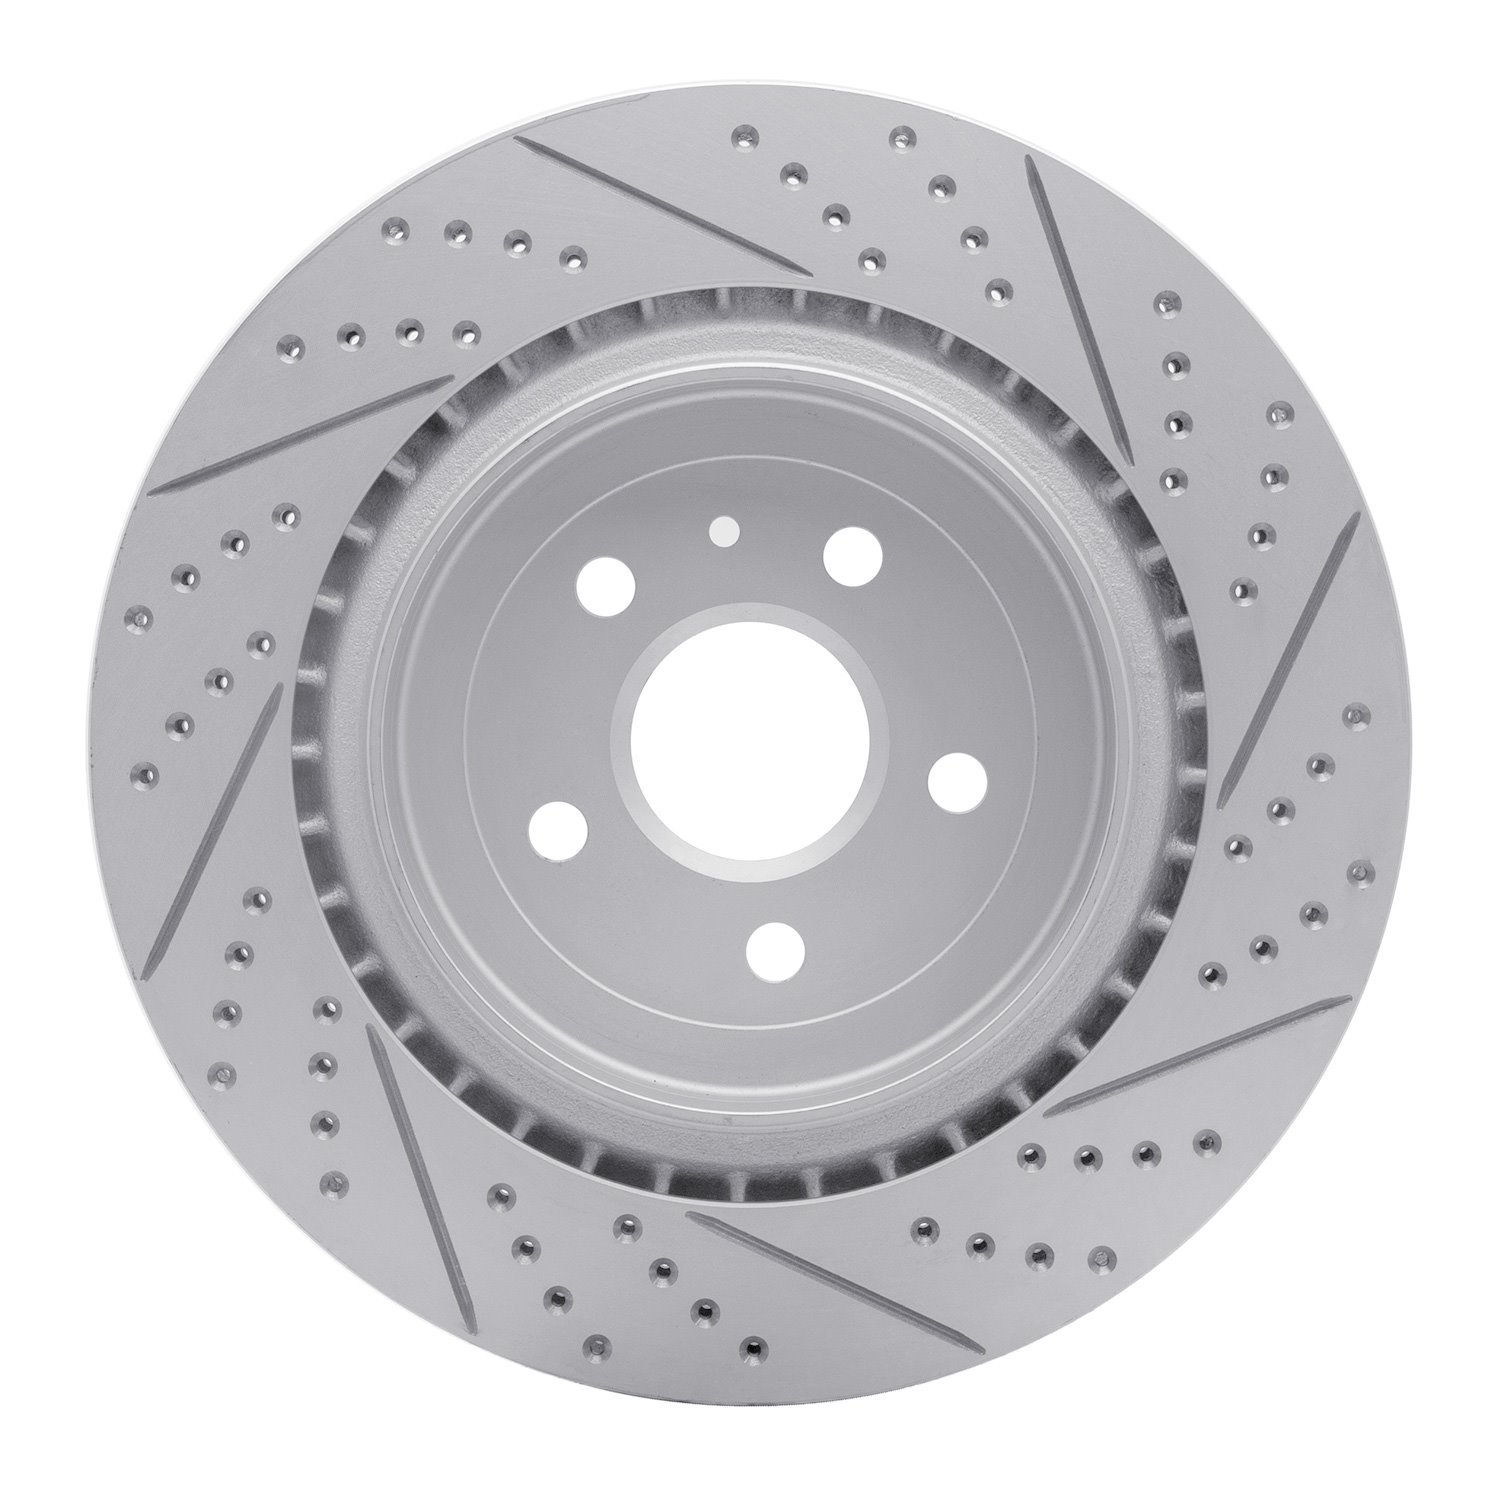 830-47039L Geoperformance Drilled/Slotted Brake Rotor, Fits Select GM, Position: Rear Left